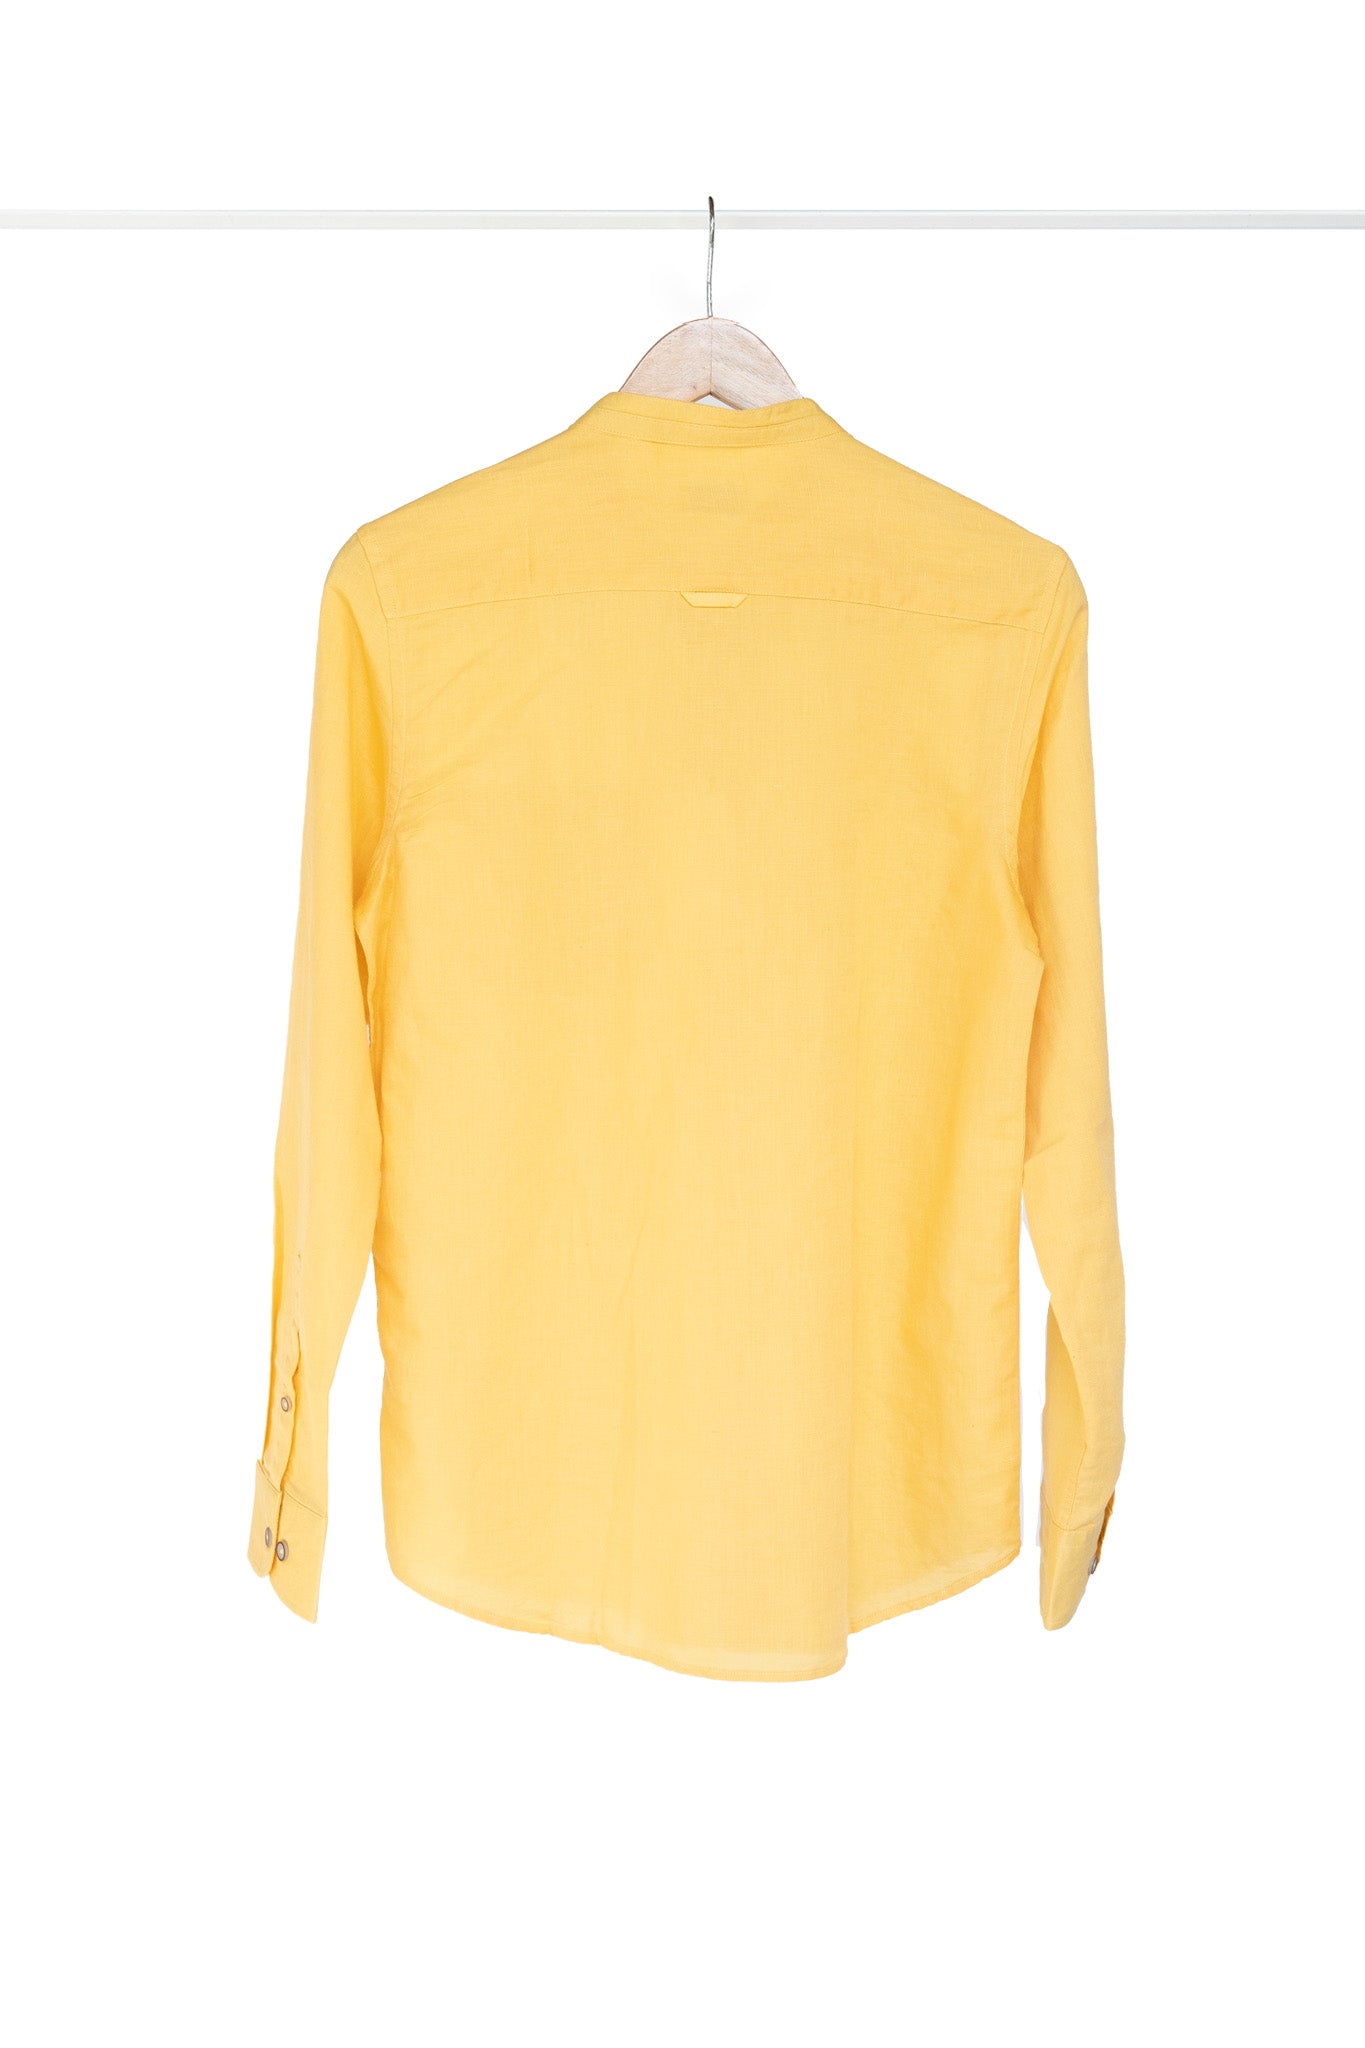 Bare Brown Mandarin Collar Cotton Linen Shirt, Slim Fit with Full Sleeves - Yellow